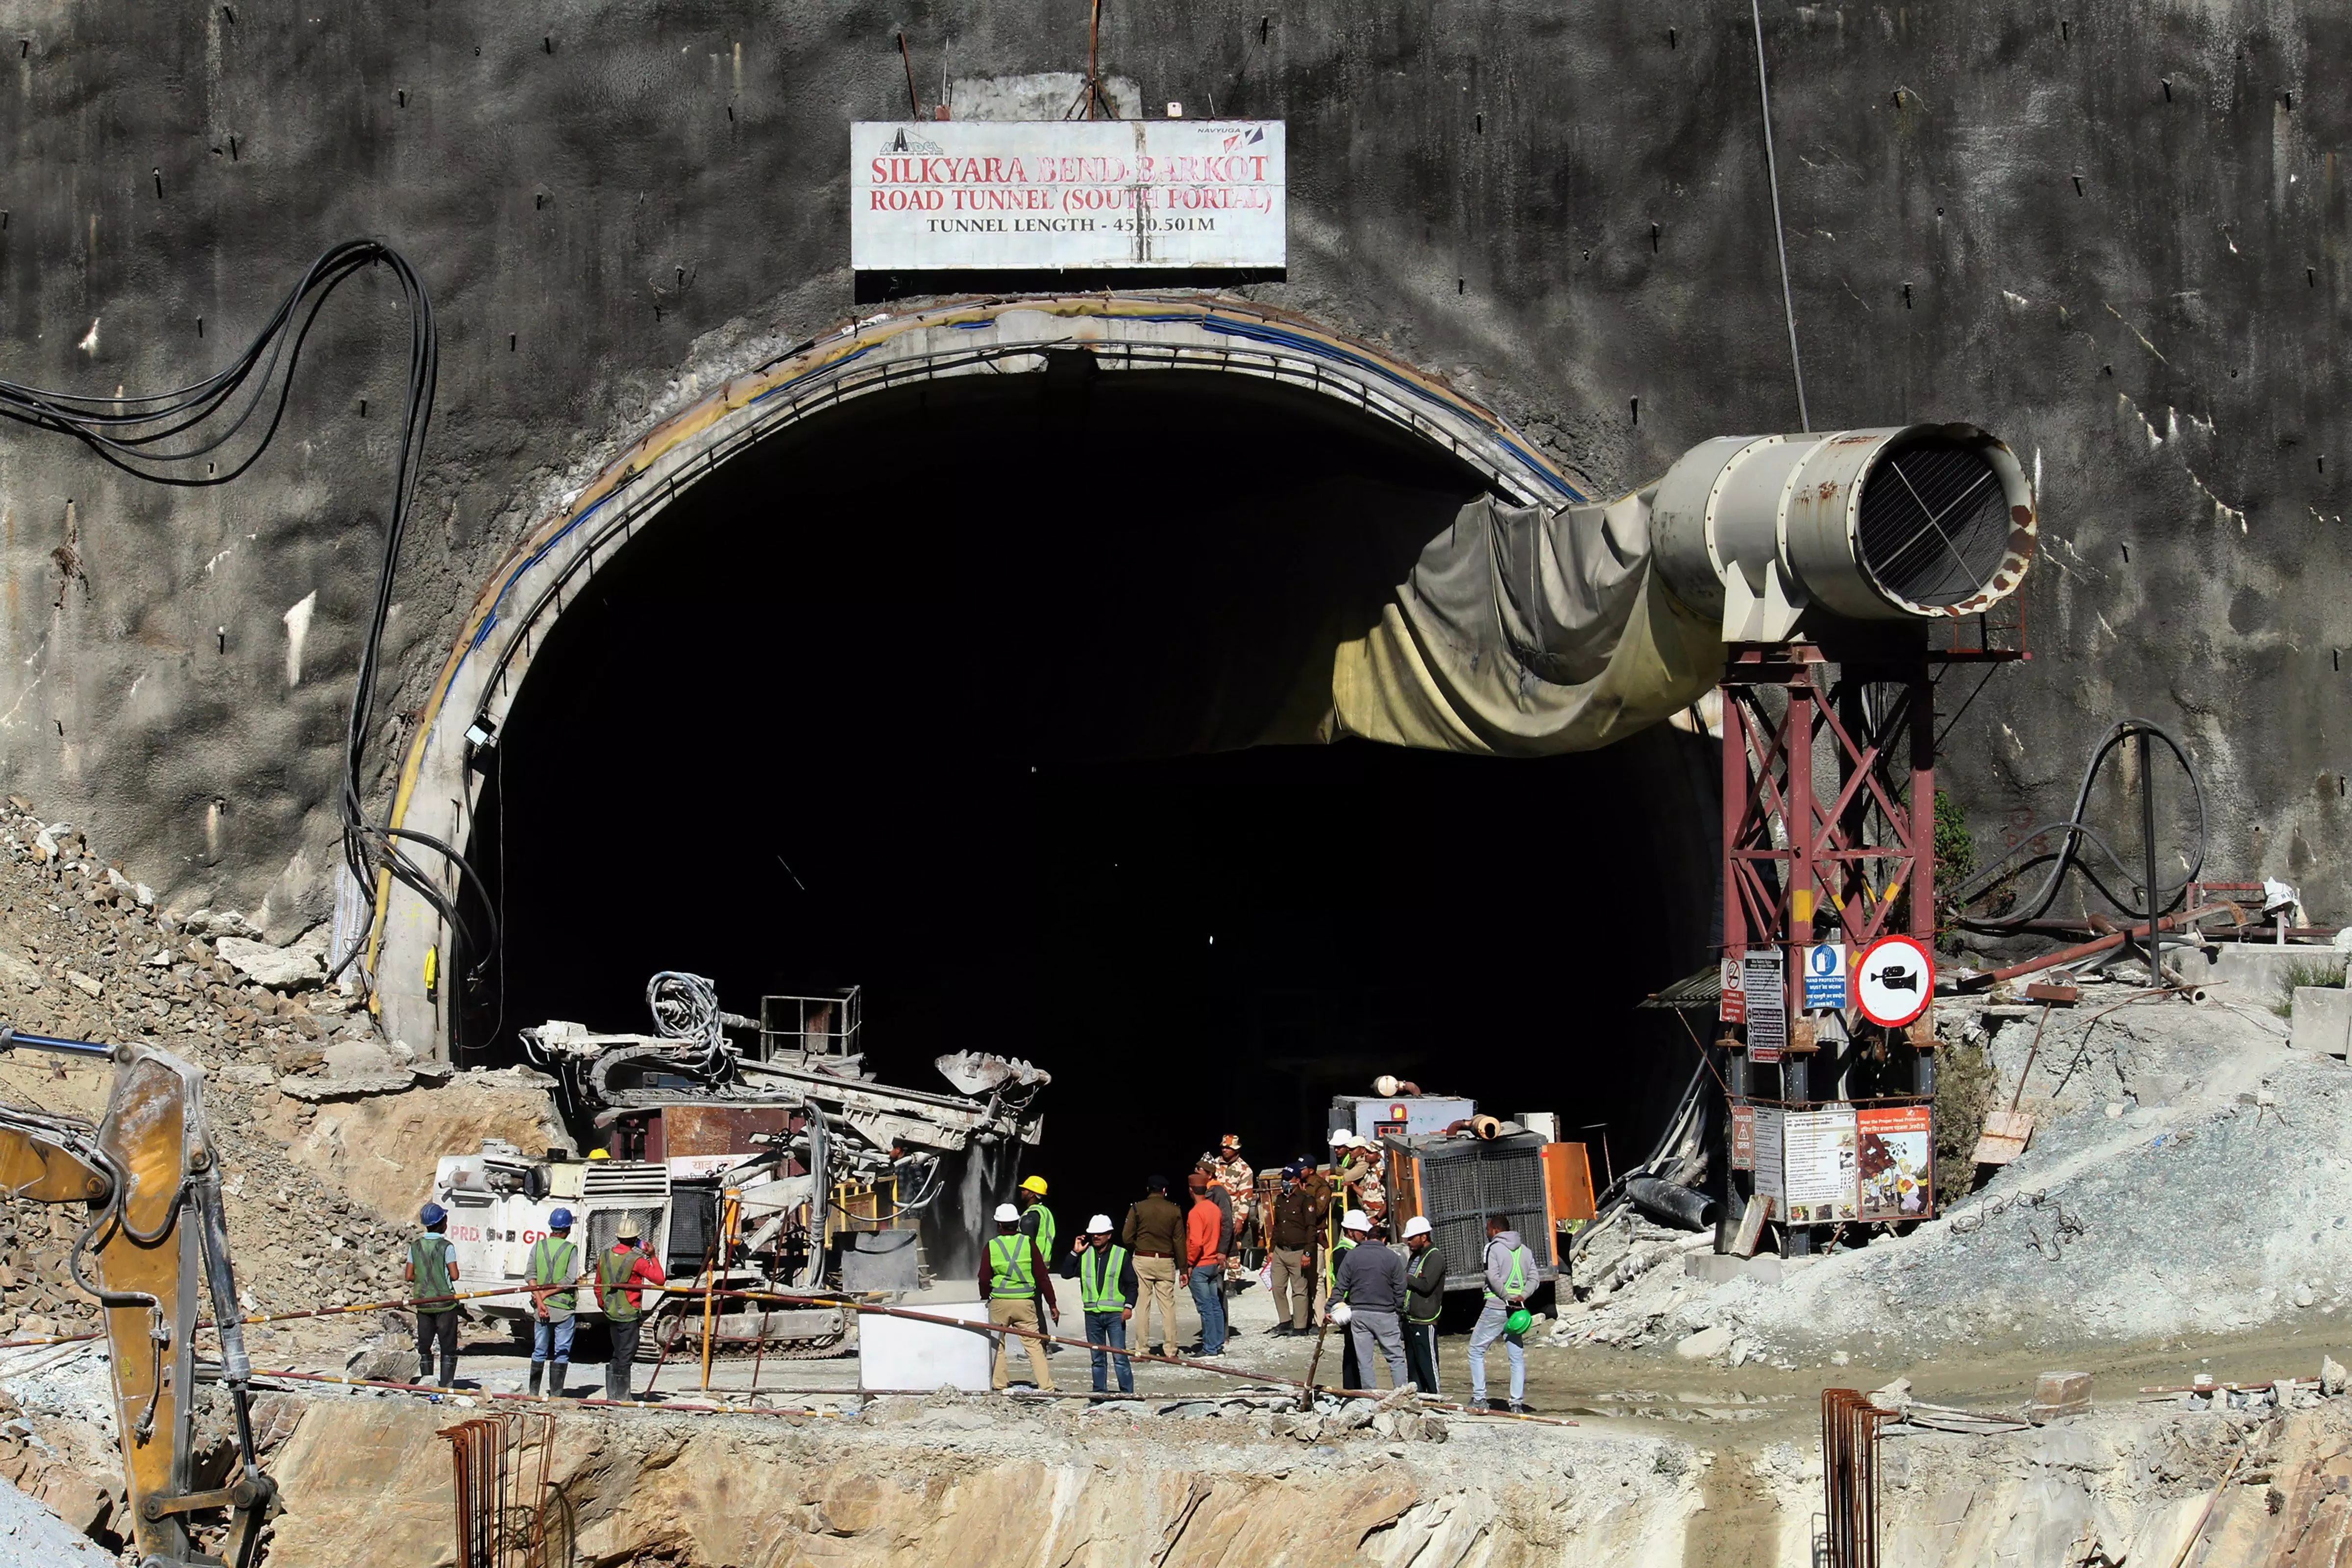 Nothing to do with Silkyara tunnel construction, says Adani Group